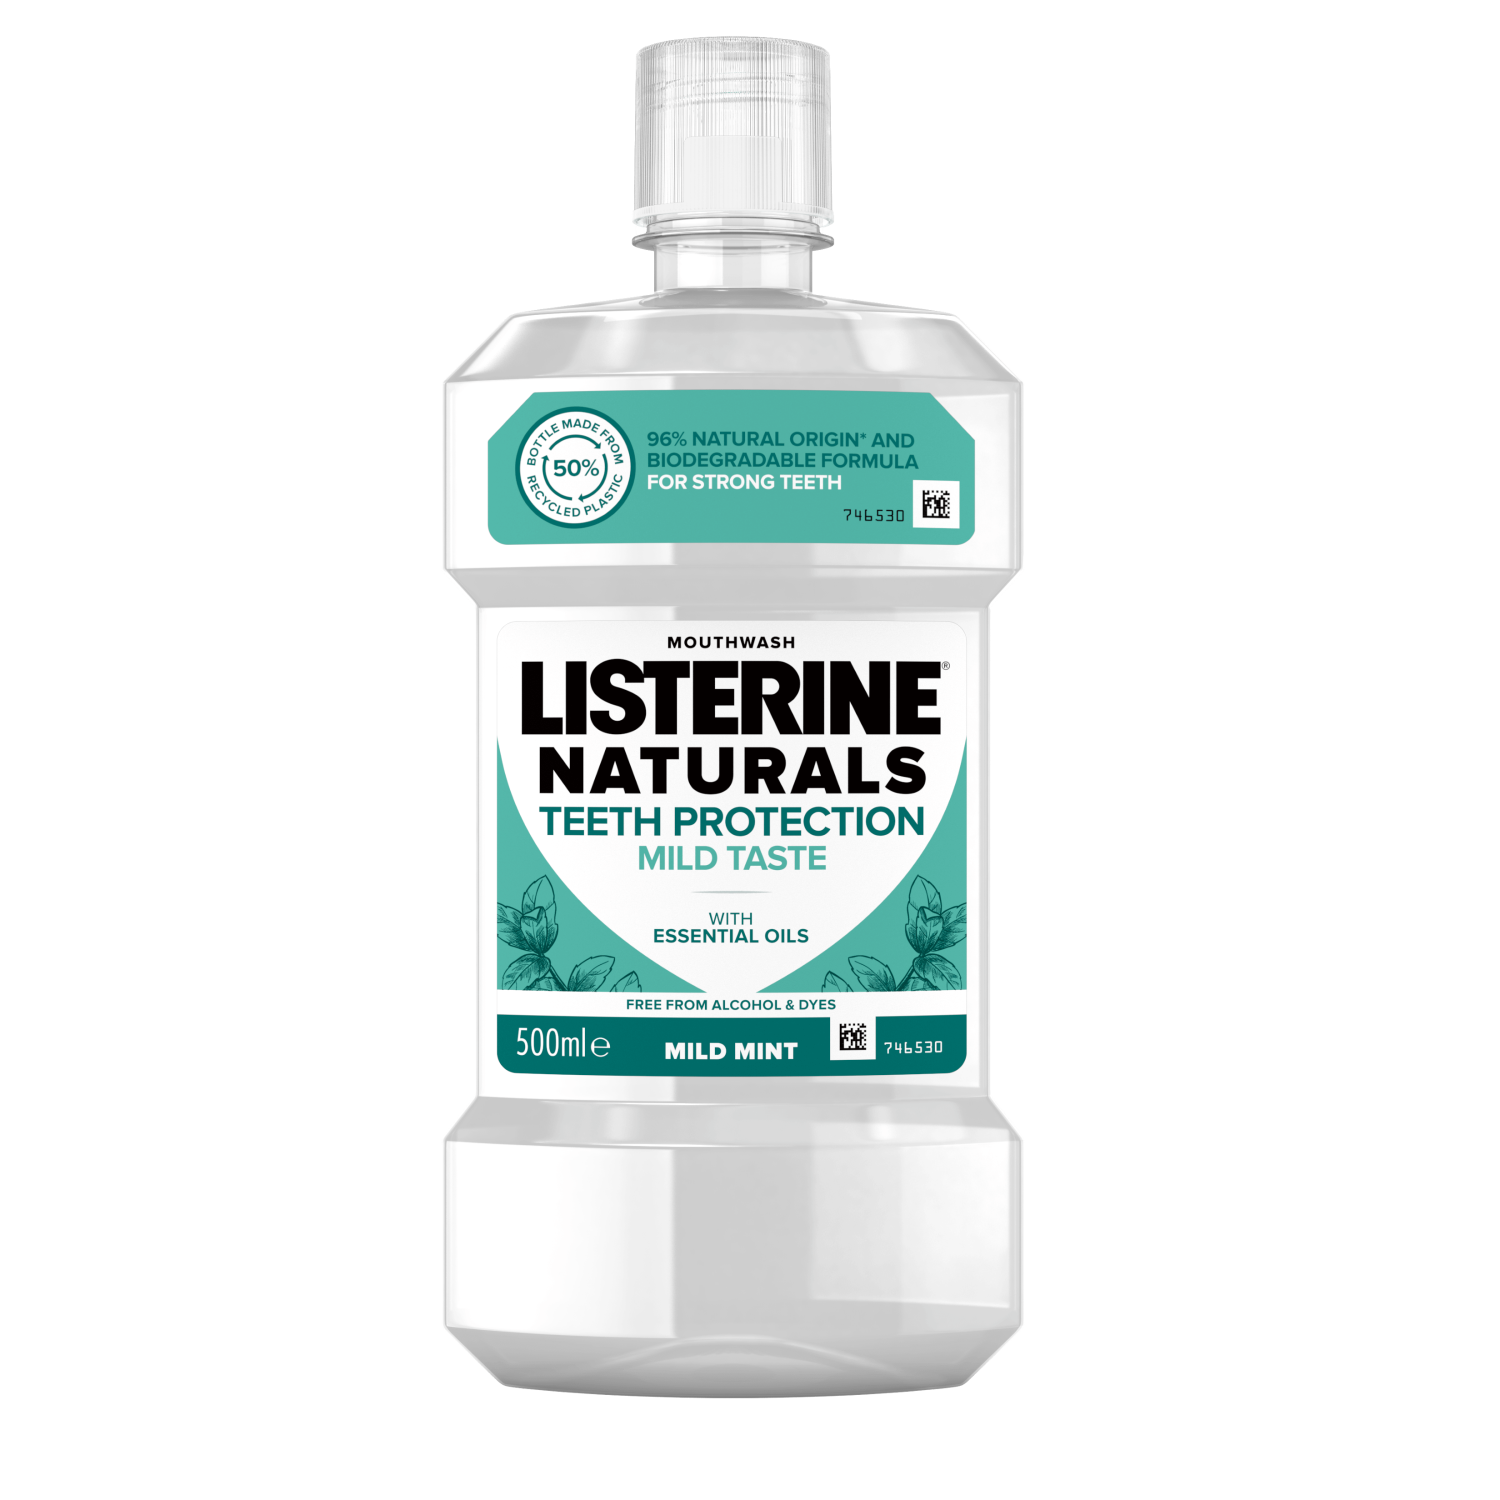 Listerine Naturals Teeth Protection Mild Taste 500 ml termékfotó, 96% natural origin and biodegradable formula for strong teeth, free from alcohol & dyes feliratokkal